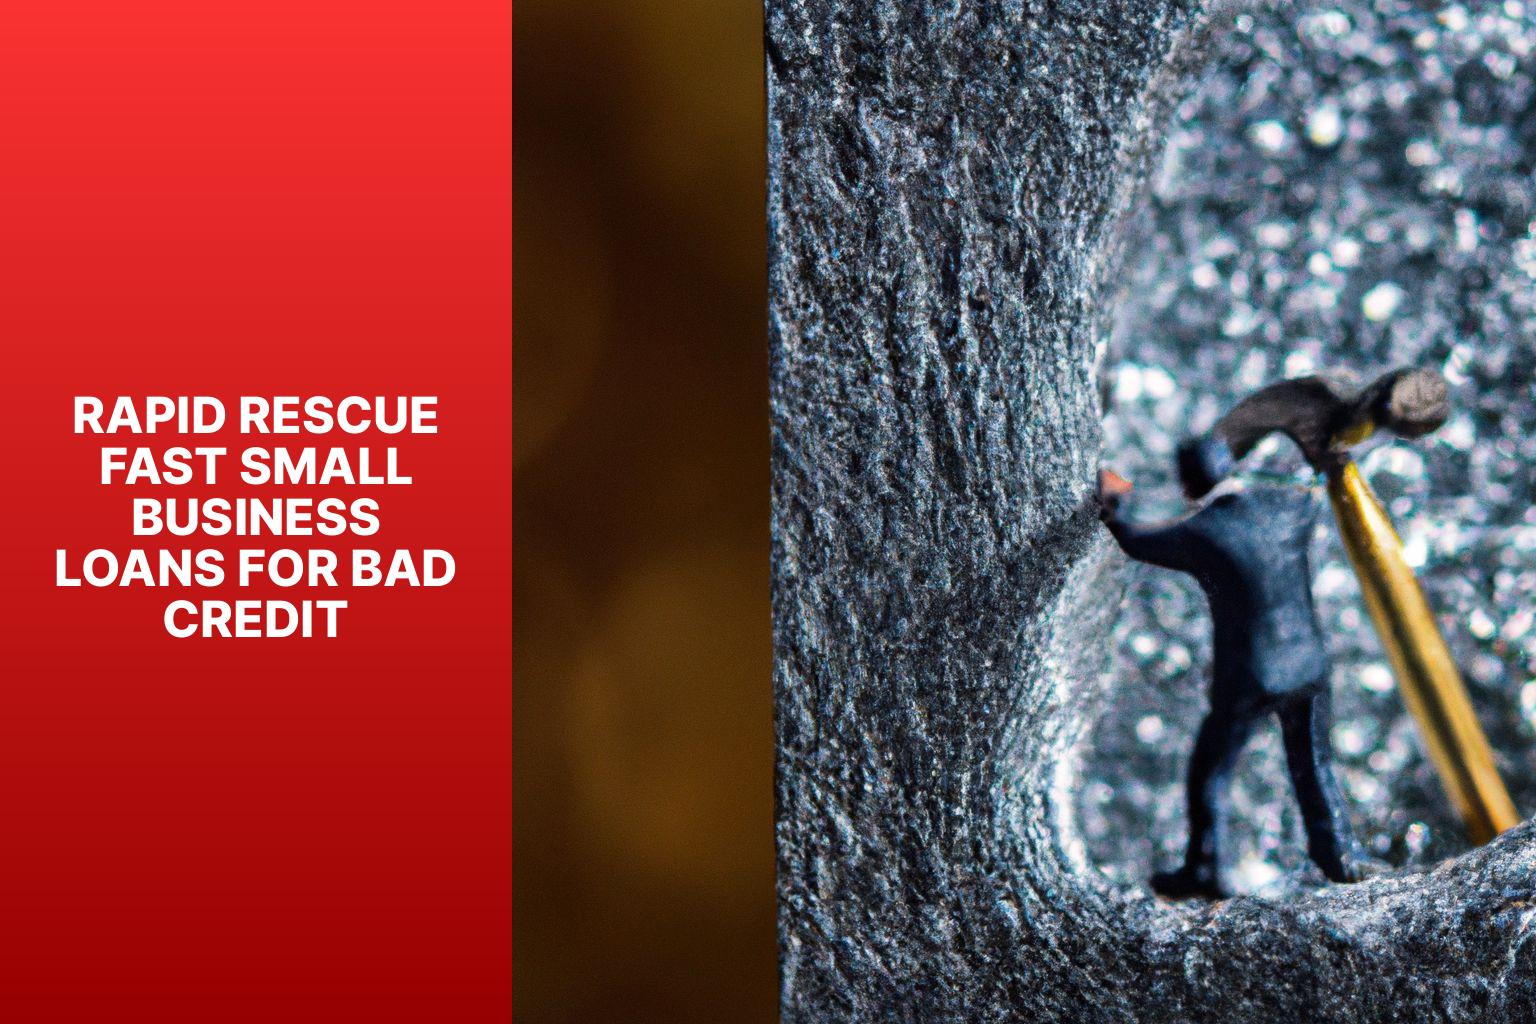 Rapid Rescue Fast Small Business Loans for Bad Credit